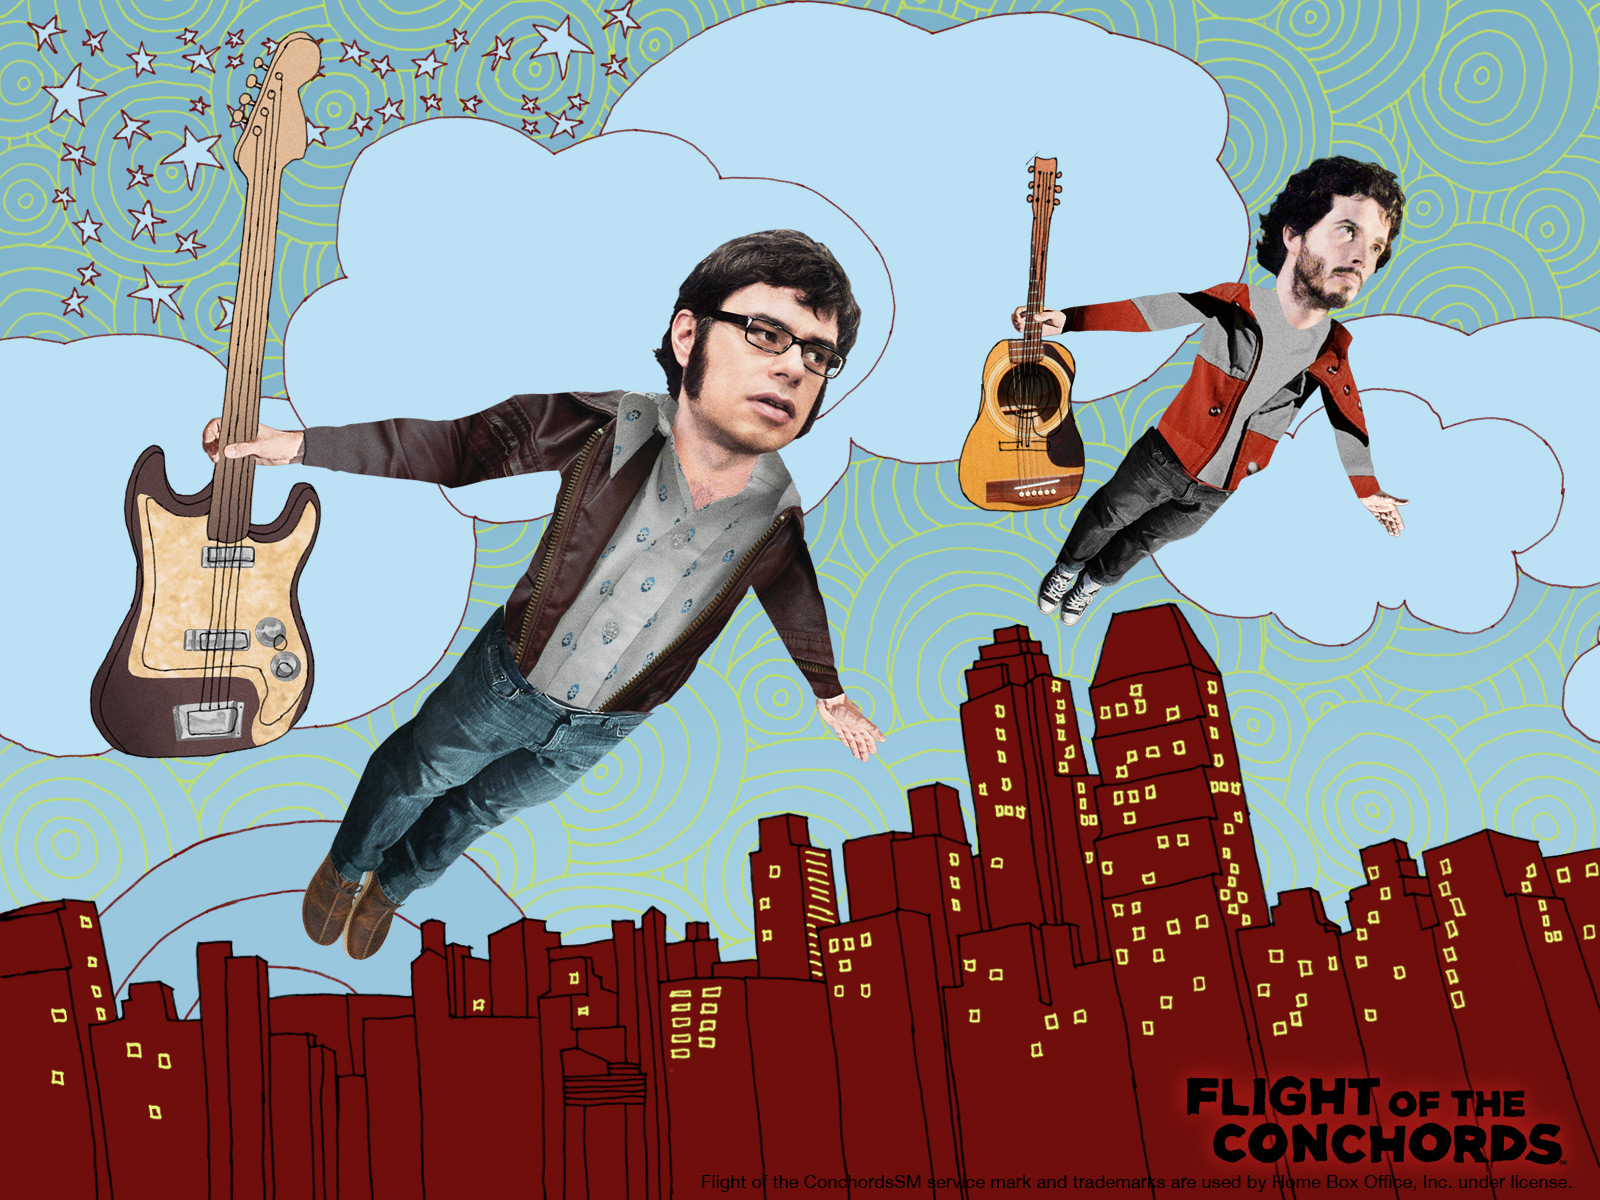 Geek insider, geekinsider, geekinsider. Com,, 'flight of the conchords' hbo renewal rumors, entertainment